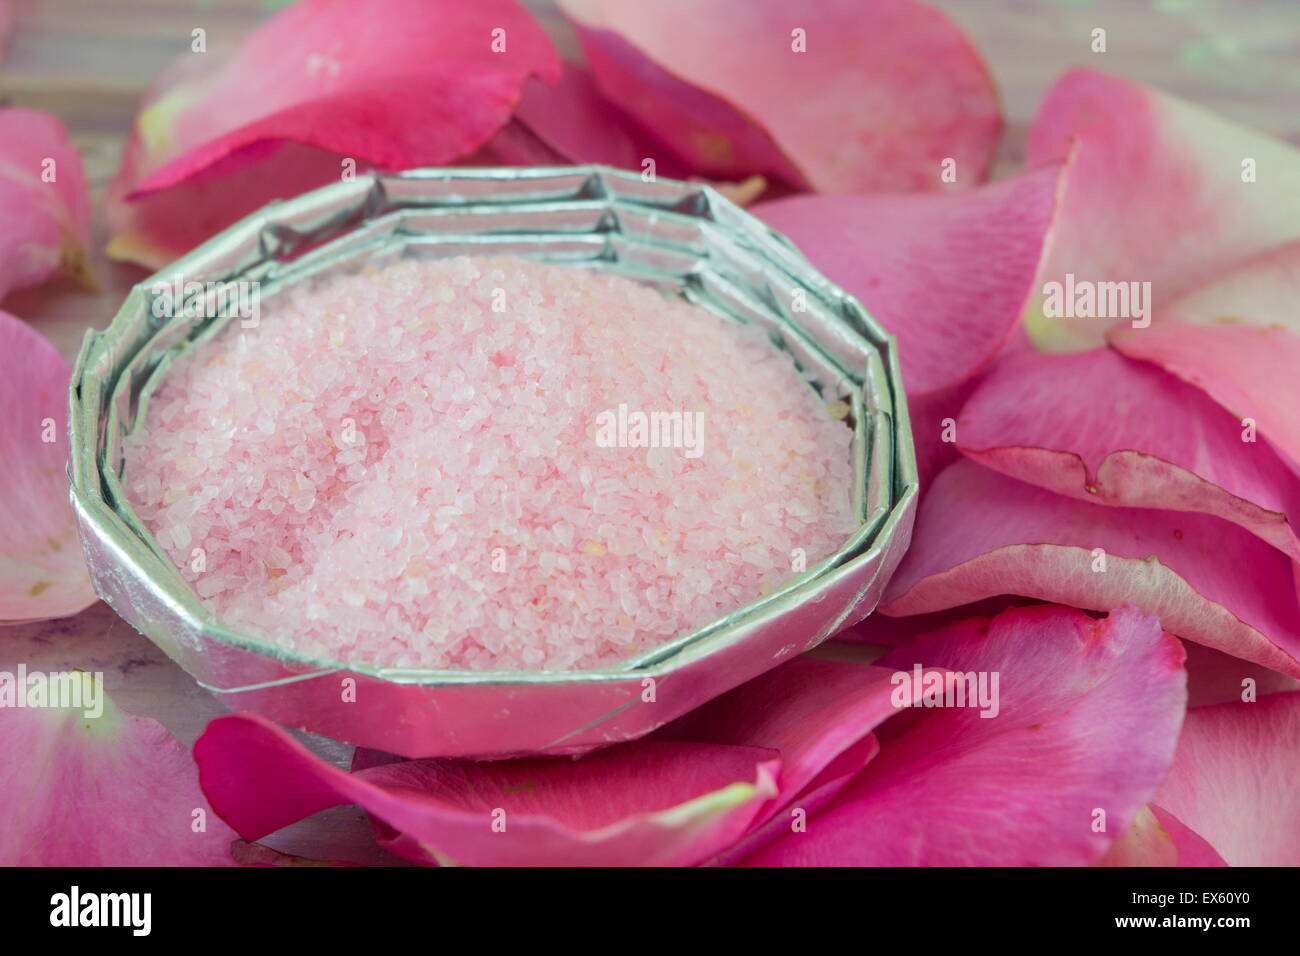 Pink aromatic bath salt on a table decorated with rose petals Stock Photo